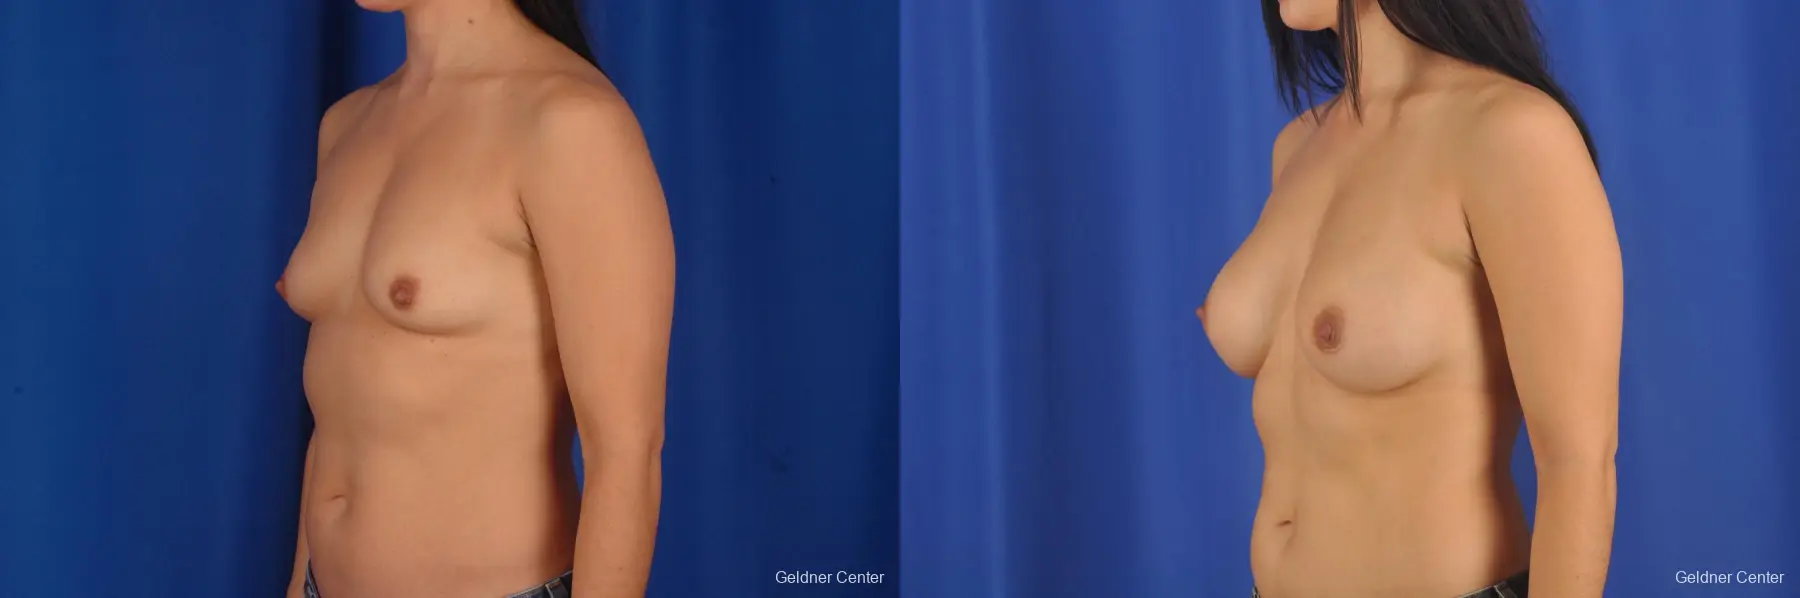 Breast Augmentation Hinsdale, Chicago 2299 - Before and After 4